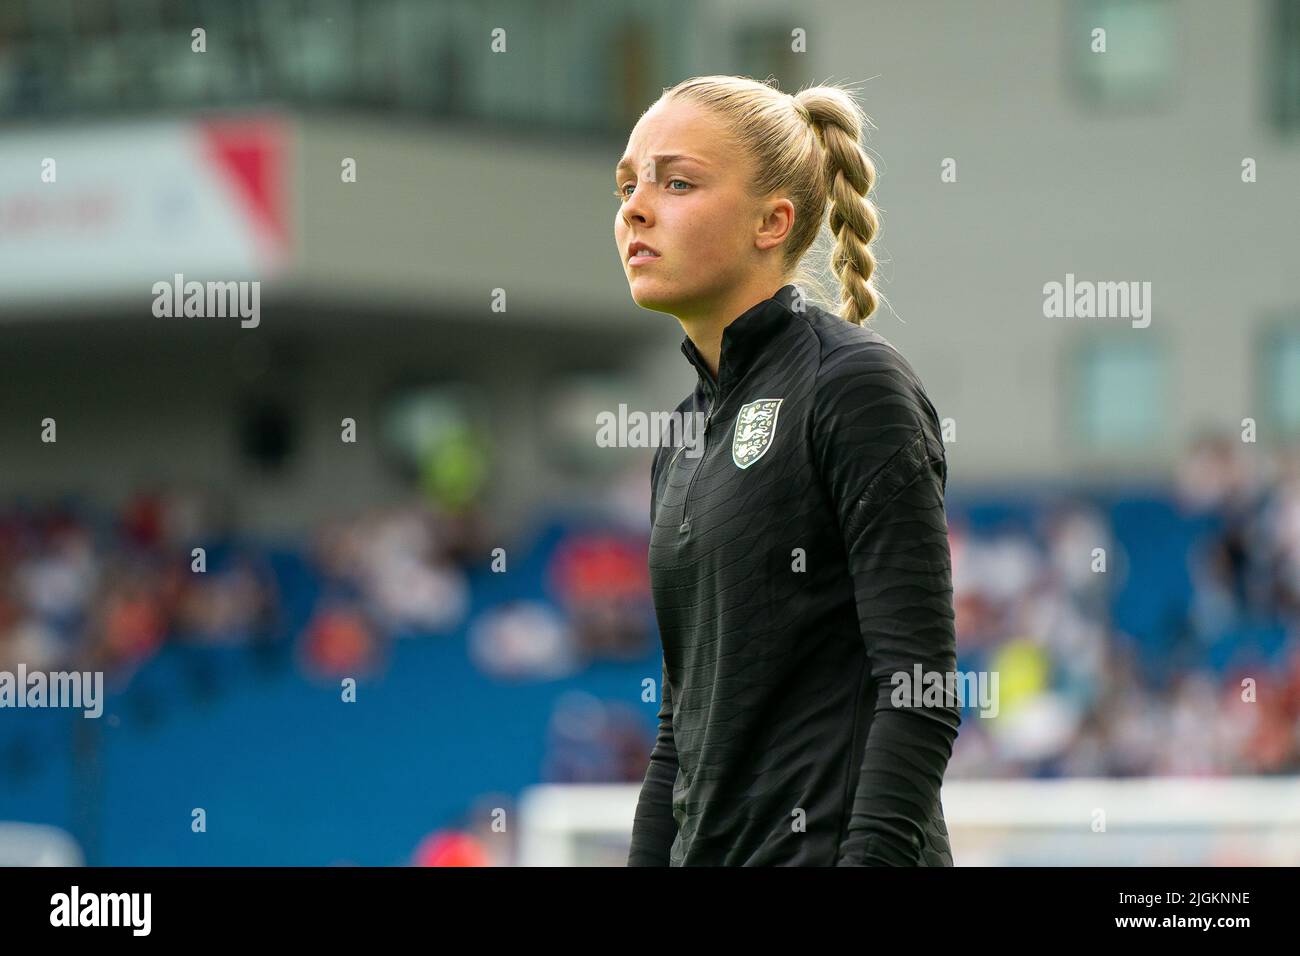 Brighton, UK. 11th July, 2022. Ellie Roebuck (21 England) during the UEFA Womens Euro 2022 football match between England and Norway at the Community Stadium in Brighton, England. (Foto: Sam Mallia/Sports Press Photo/C - ONE HOUR DEADLINE - ONLY ACTIVATE FTP IF IMAGES LESS THAN ONE HOUR OLD - Alamy) Credit: SPP Sport Press Photo. /Alamy Live News Stock Photo